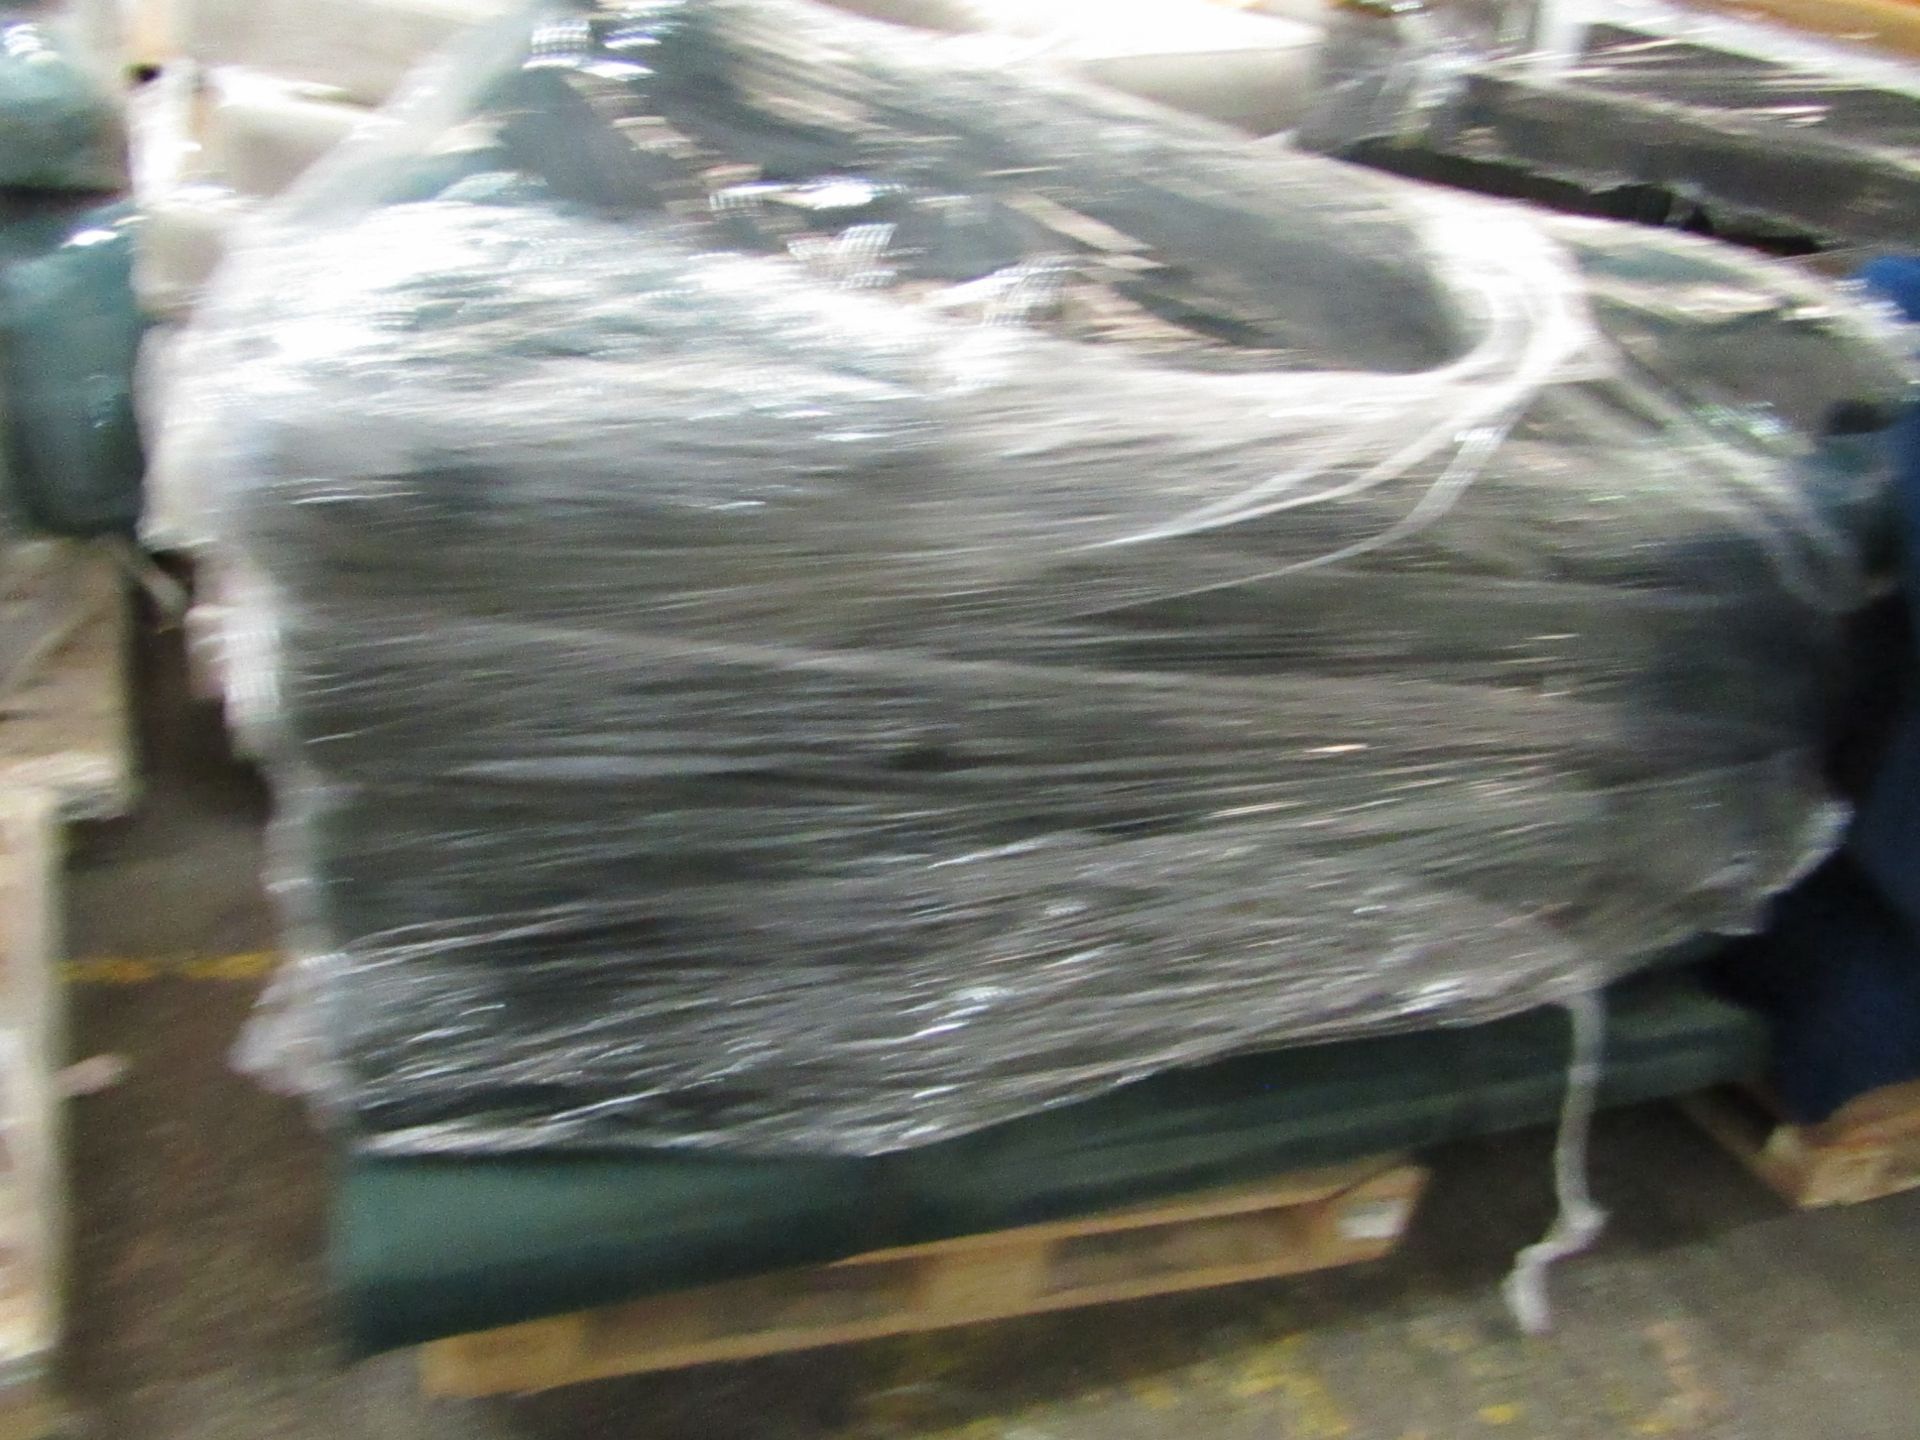 10% Buyers Premium +VAT, 24 Pallets of Genuine SNUG SOFA parts - Mixed Lots of Bases Backs Arms - Image 7 of 20